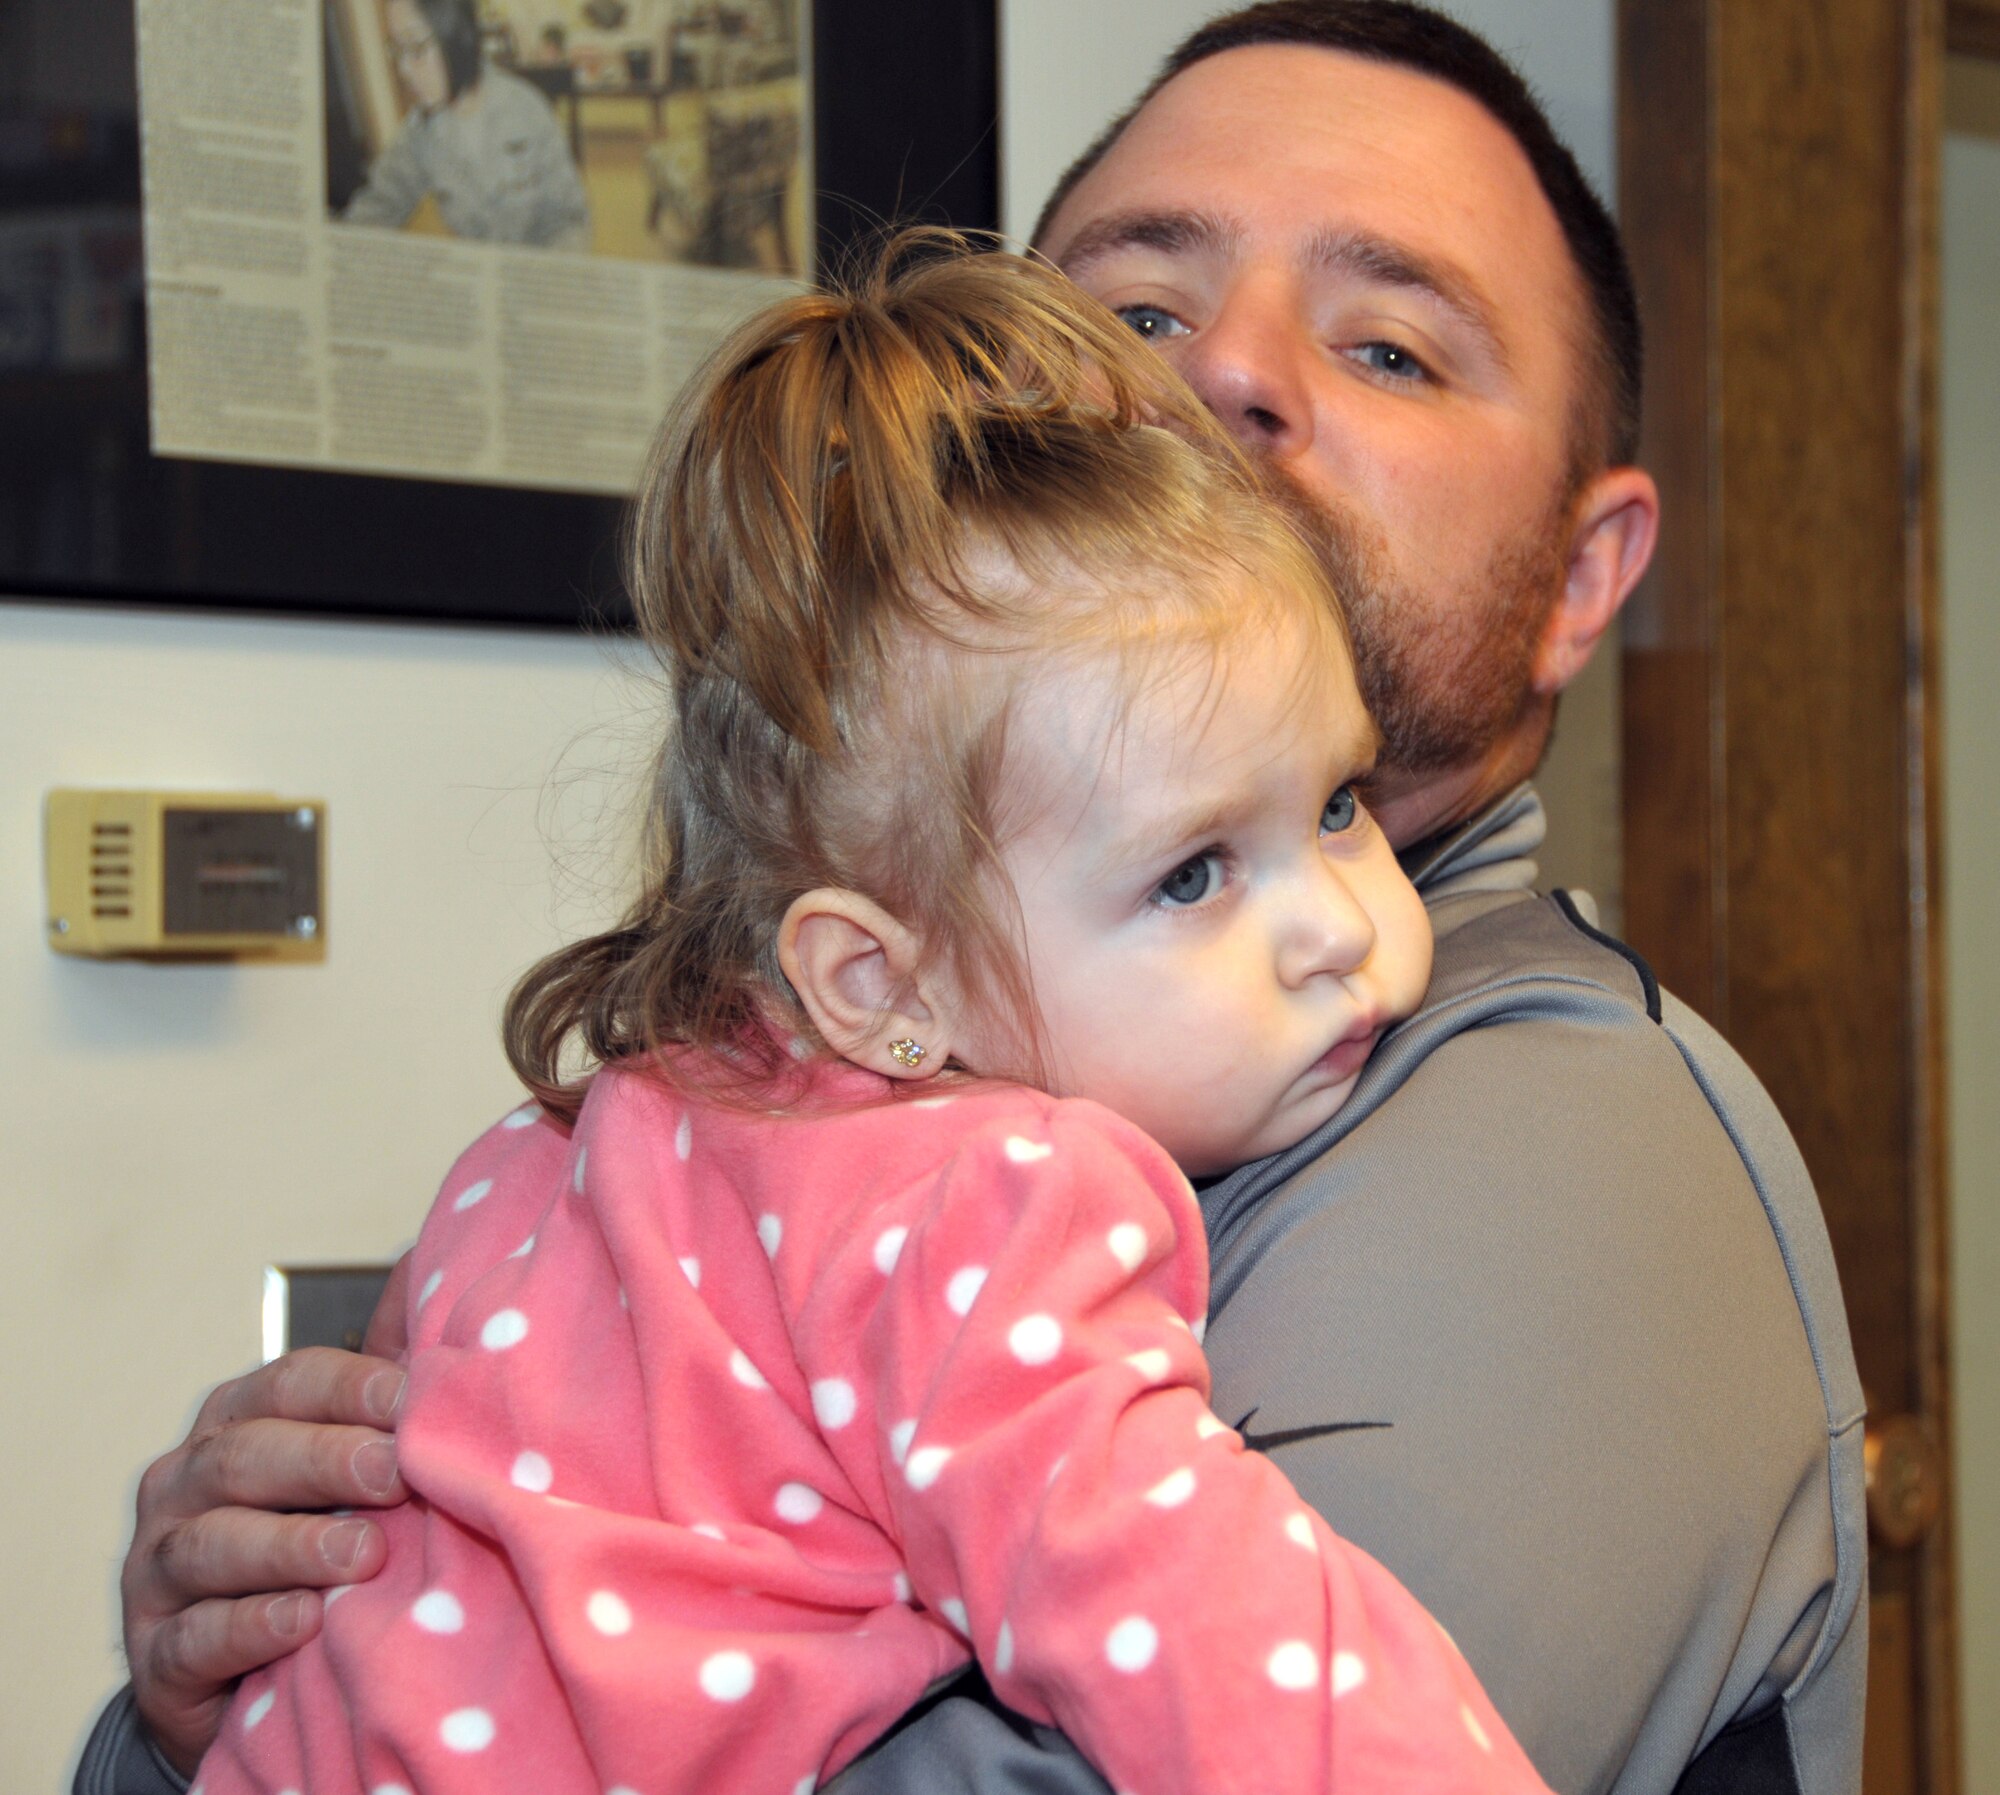 Gene LeClaire holds his 22-month-old daughter, Sophia, during a visit to the base Oct. 5, 2014. The First Six Council raised $500 during the 109th Airlift Wing Family Day to donate to the LeClaire family for medical expenses for Sophia who has cerebral palsy. (U.S. Air National Guard photo by Tech. Sgt. Catharine Schmidt/Released)